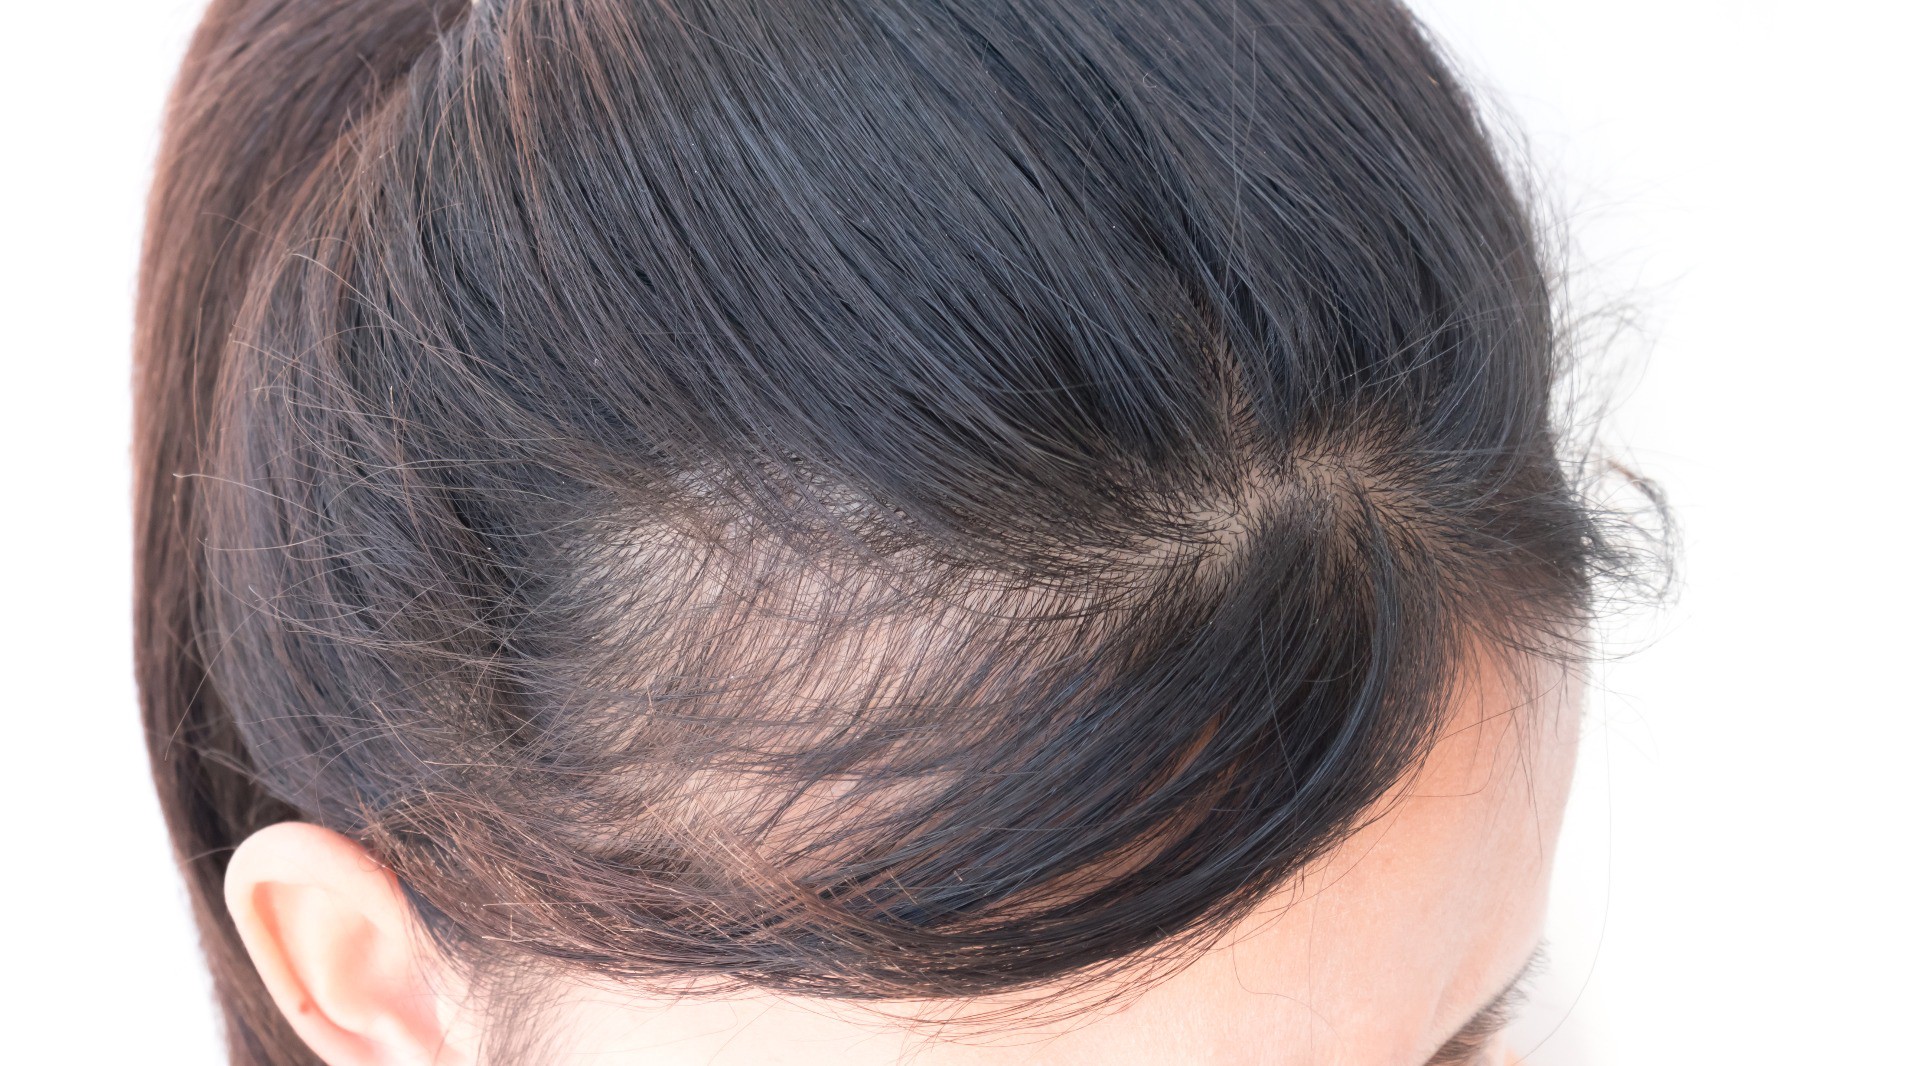 Thinning Hair And Hair Loss: Could It Be Female Pattern Hair Loss - Dermato...